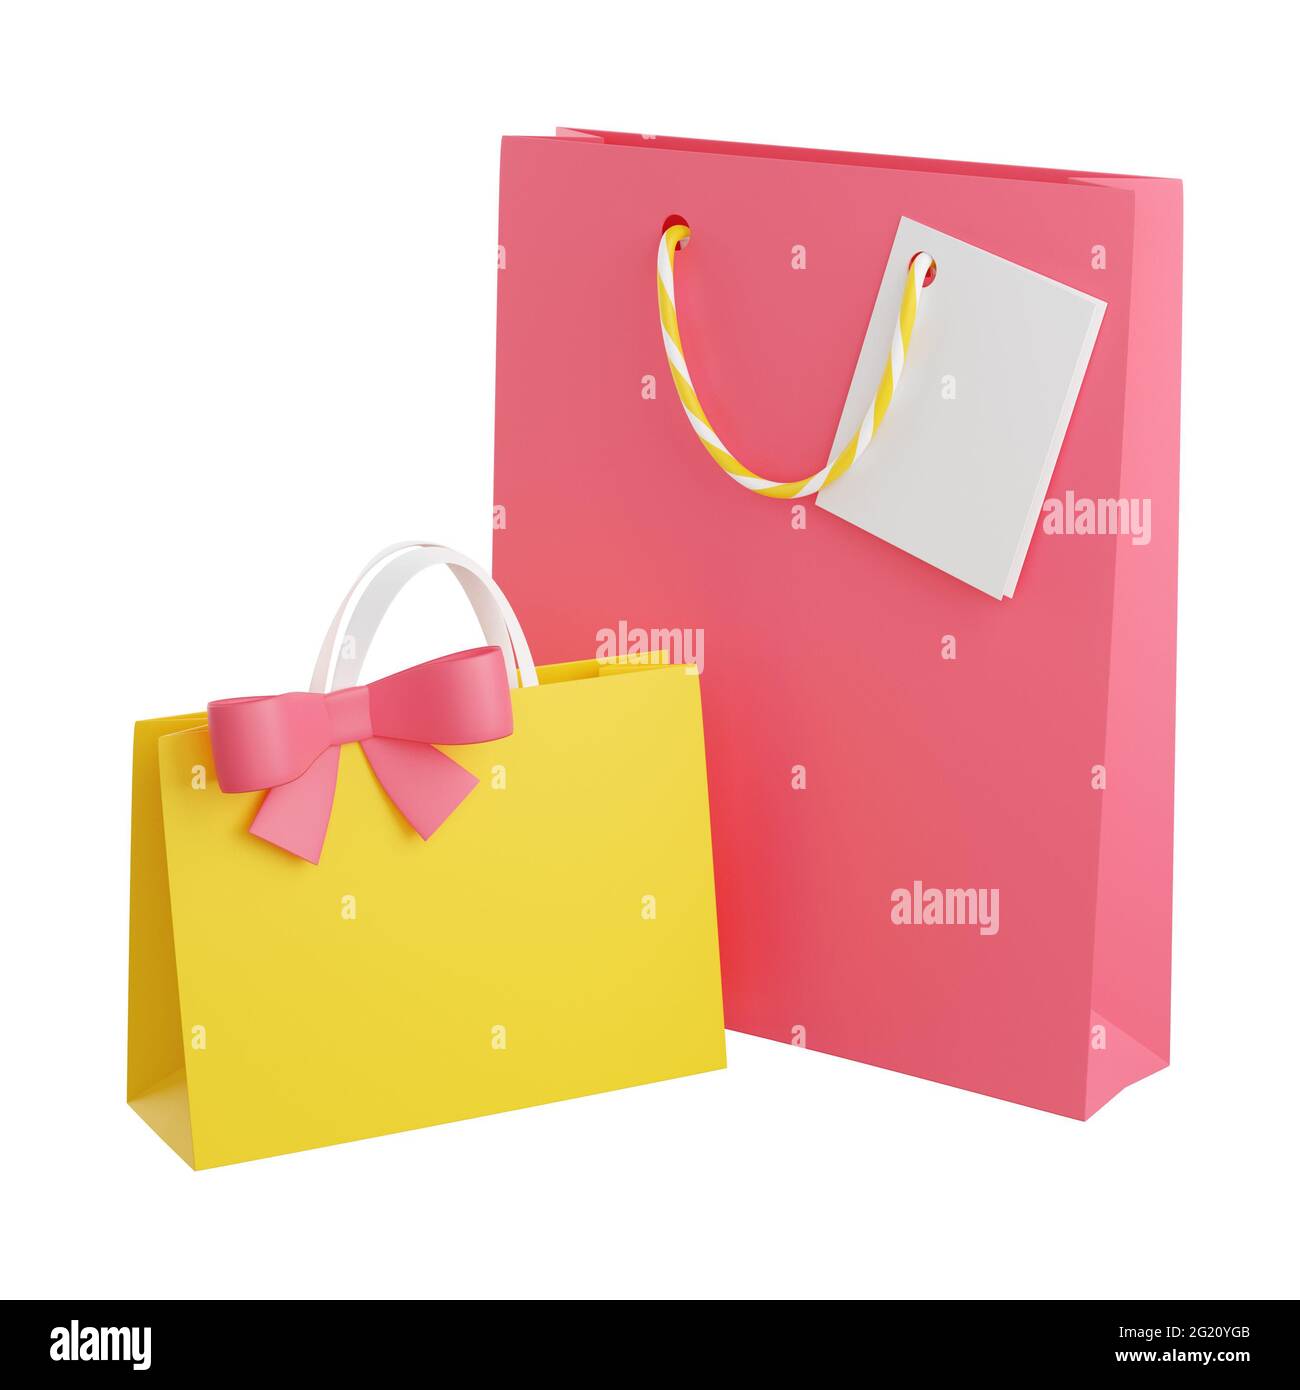 Pink Paper Shopping Bag Fashion Boutique Purchase Present Package With  Handles 3d Icon Vector Stock Illustration - Download Image Now - iStock